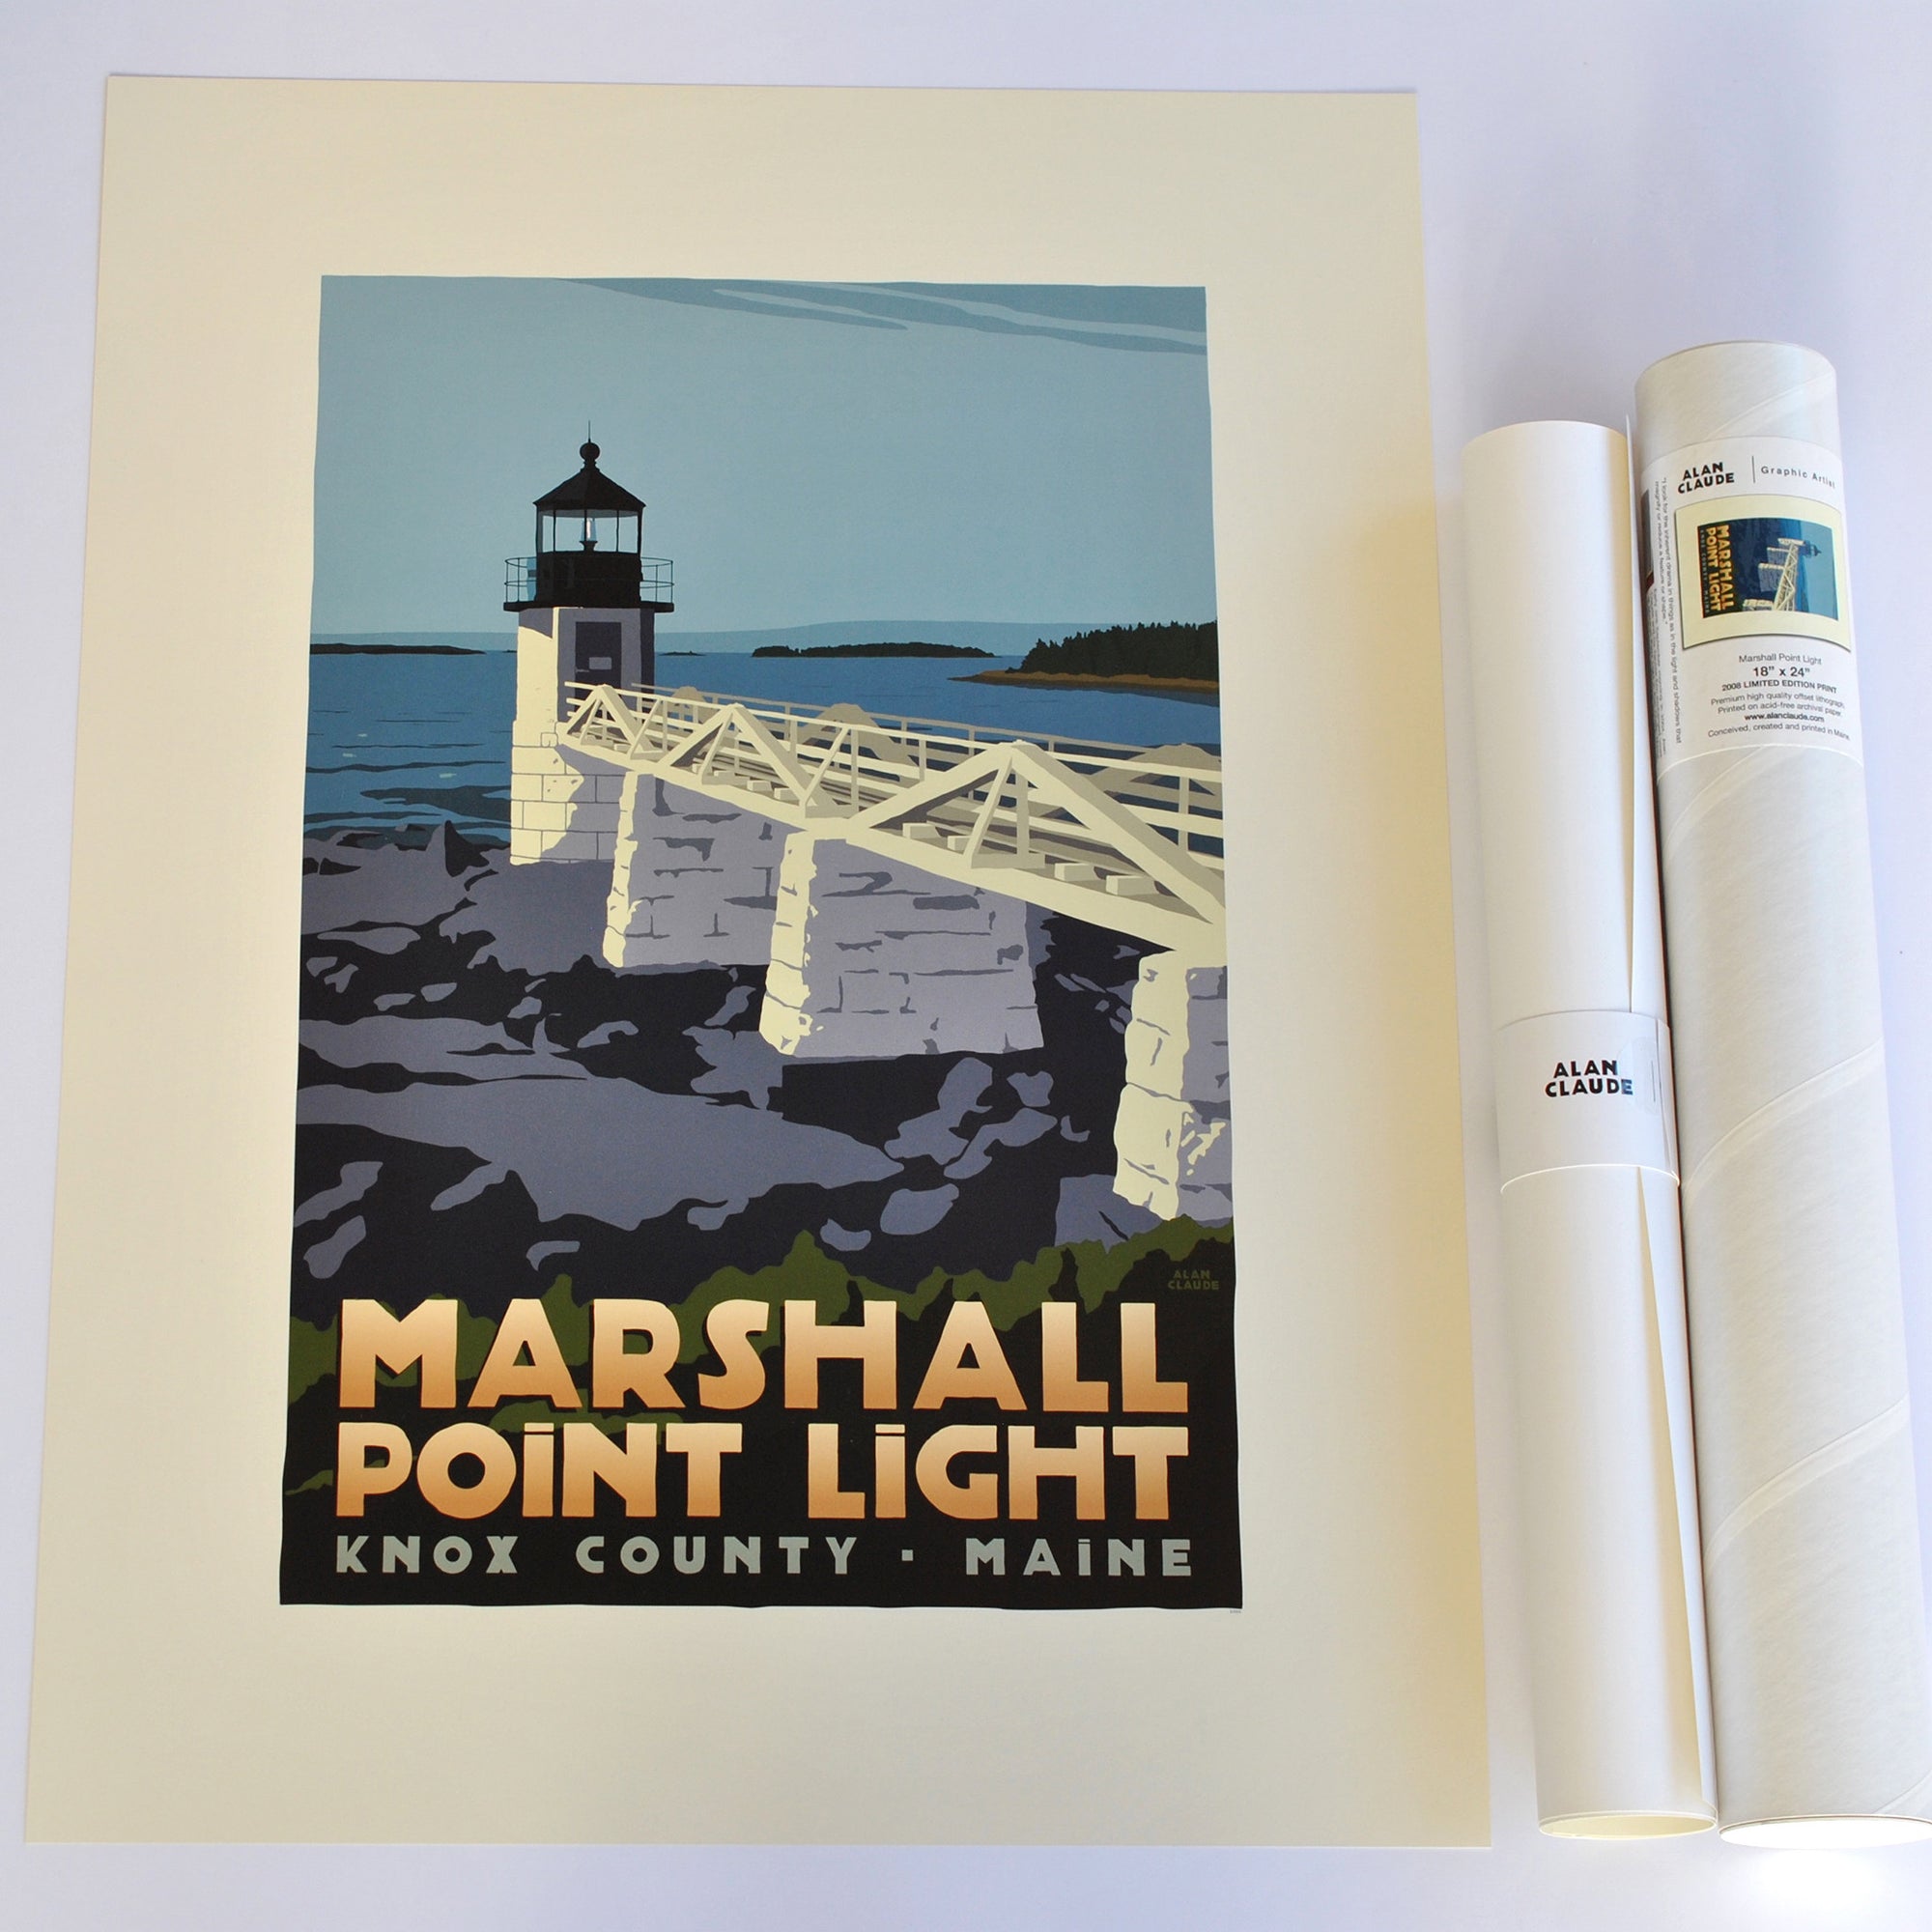 Marshall Point Light Art Print 18" x 24" Travel Poster By Alan Claude - Maine